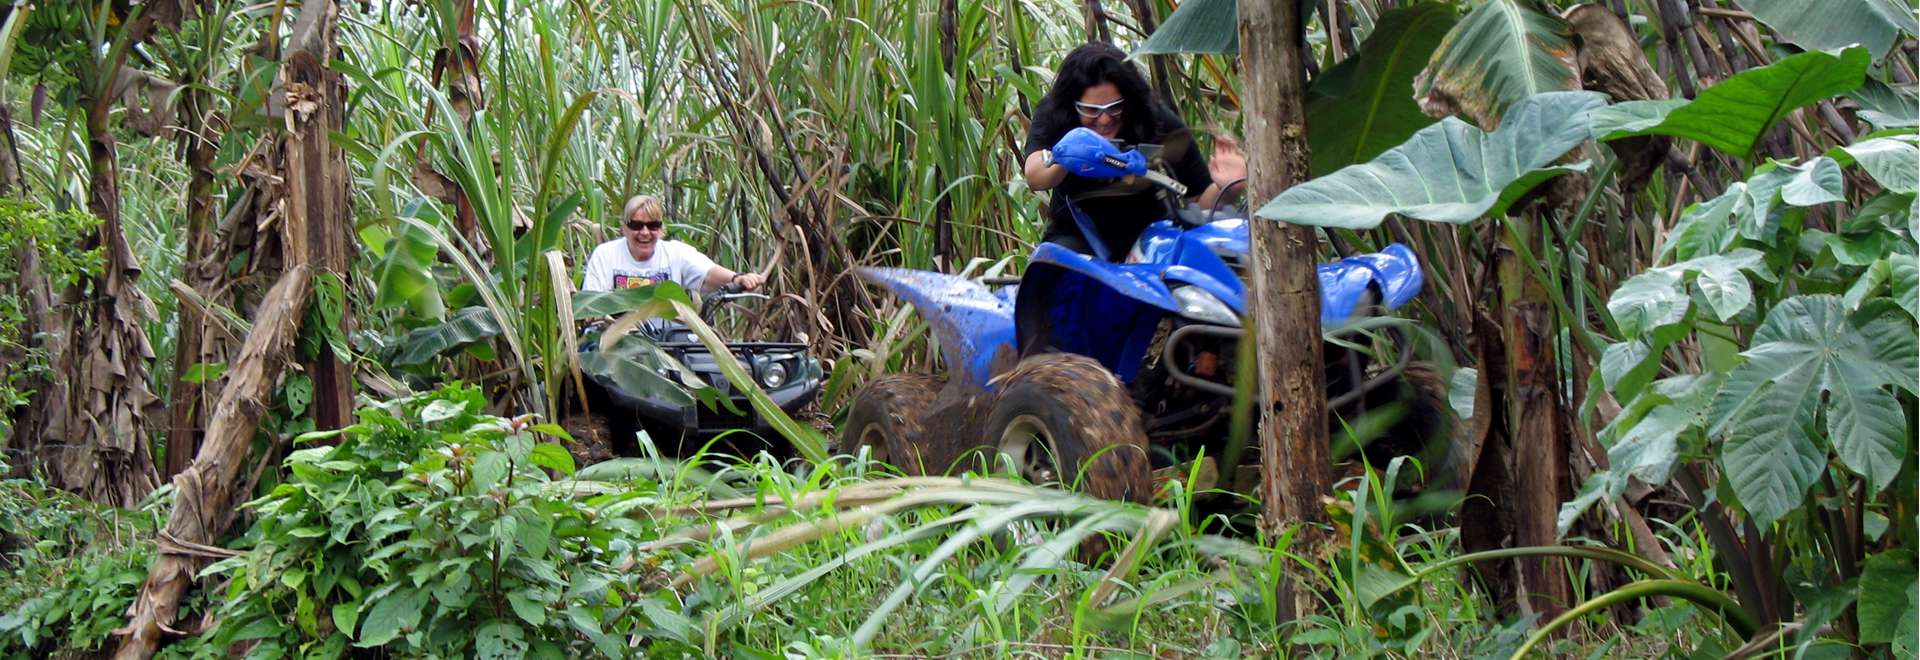 riding in sugar cane field on ATV with Serendipity Adventures Costa Rica